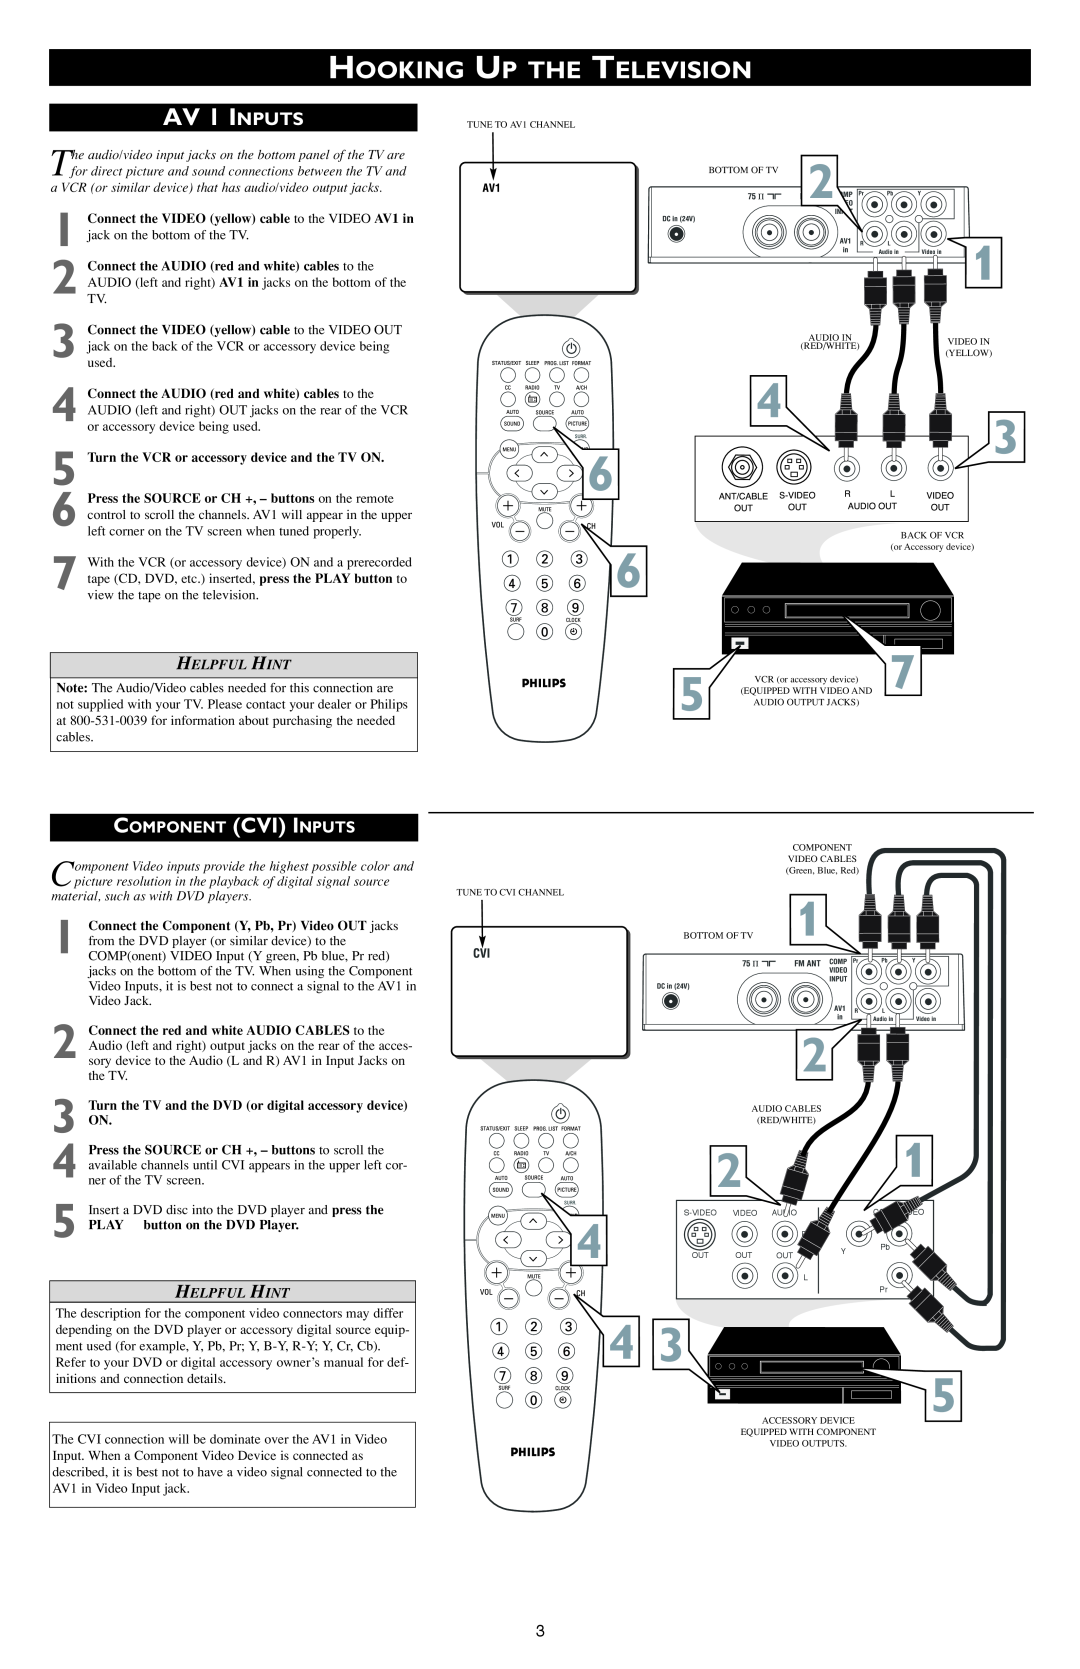 Philips 15PF7835/37B owner manual AV 1 INPUTS, Hooking Up The Television, Component Cvi Inputs, Helpful Hint 